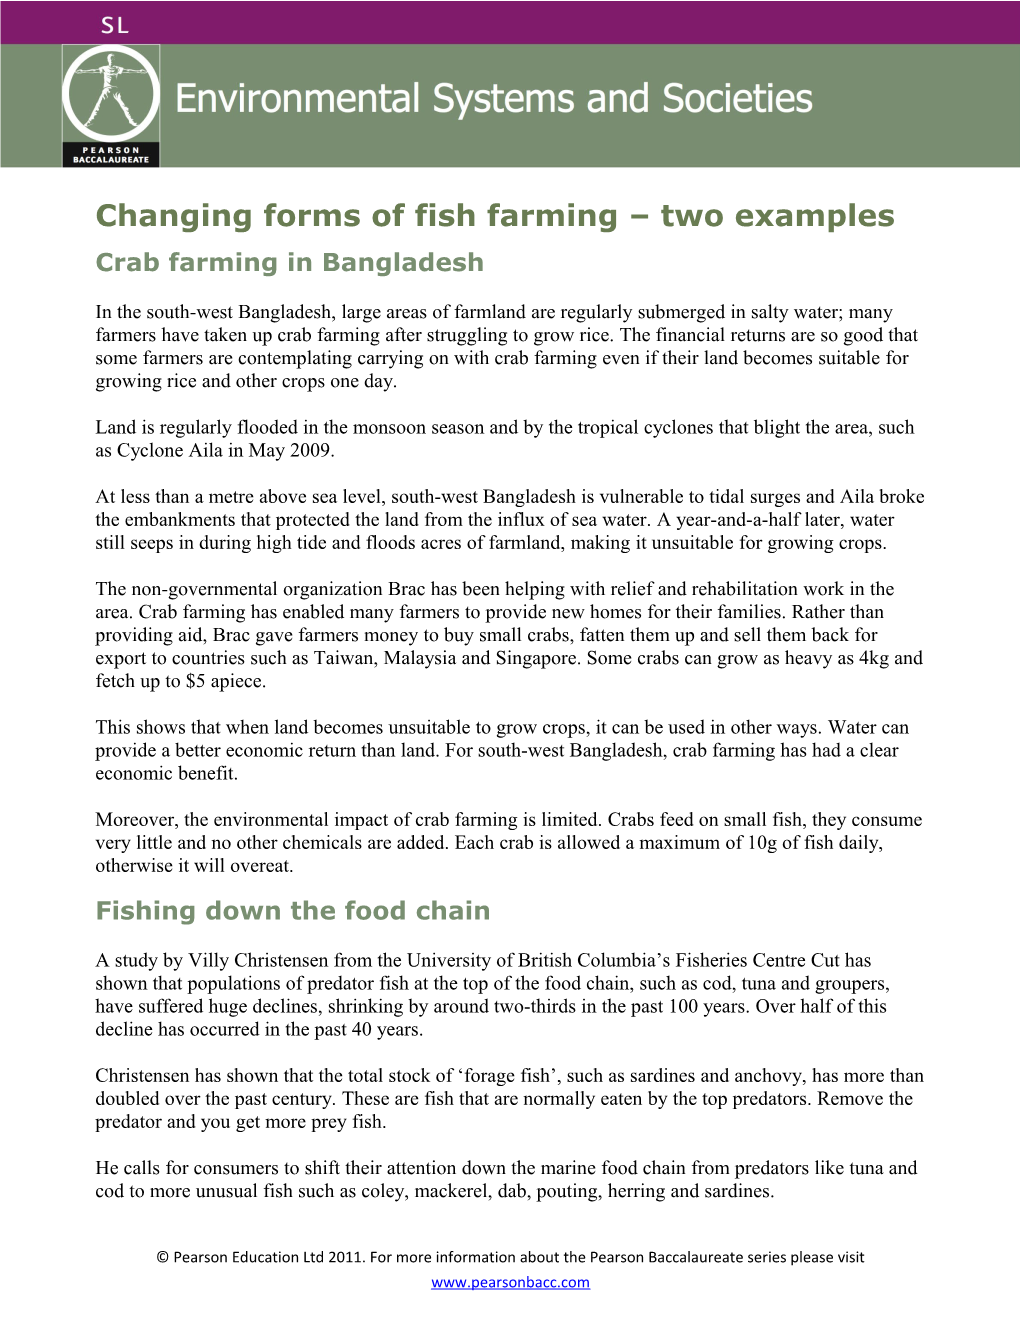 Changing Forms of Fish Farming Two Examples